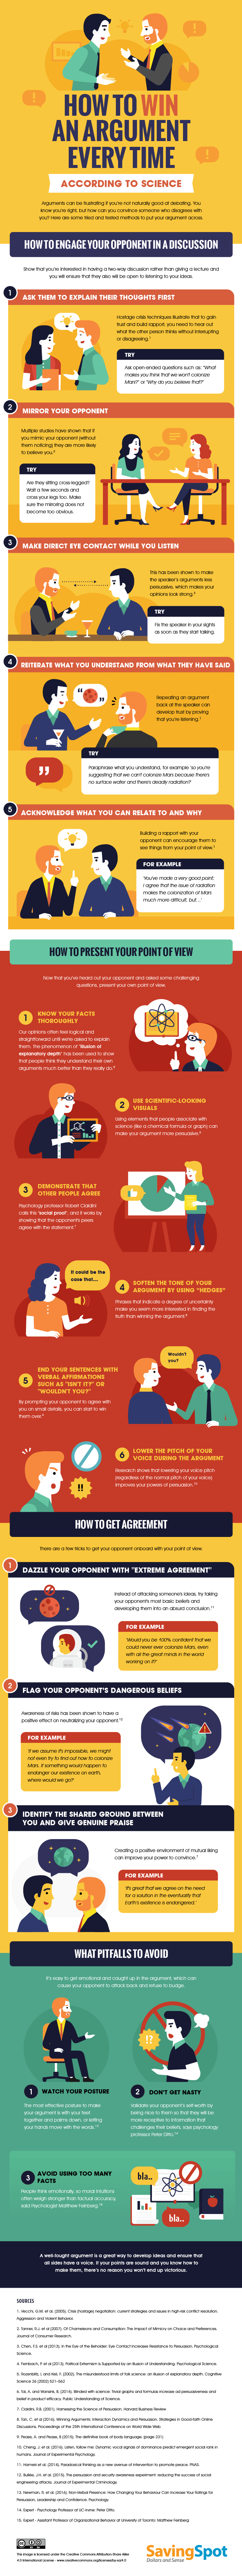 How to Win an Argument Every Time (According to Science) - infographic: 